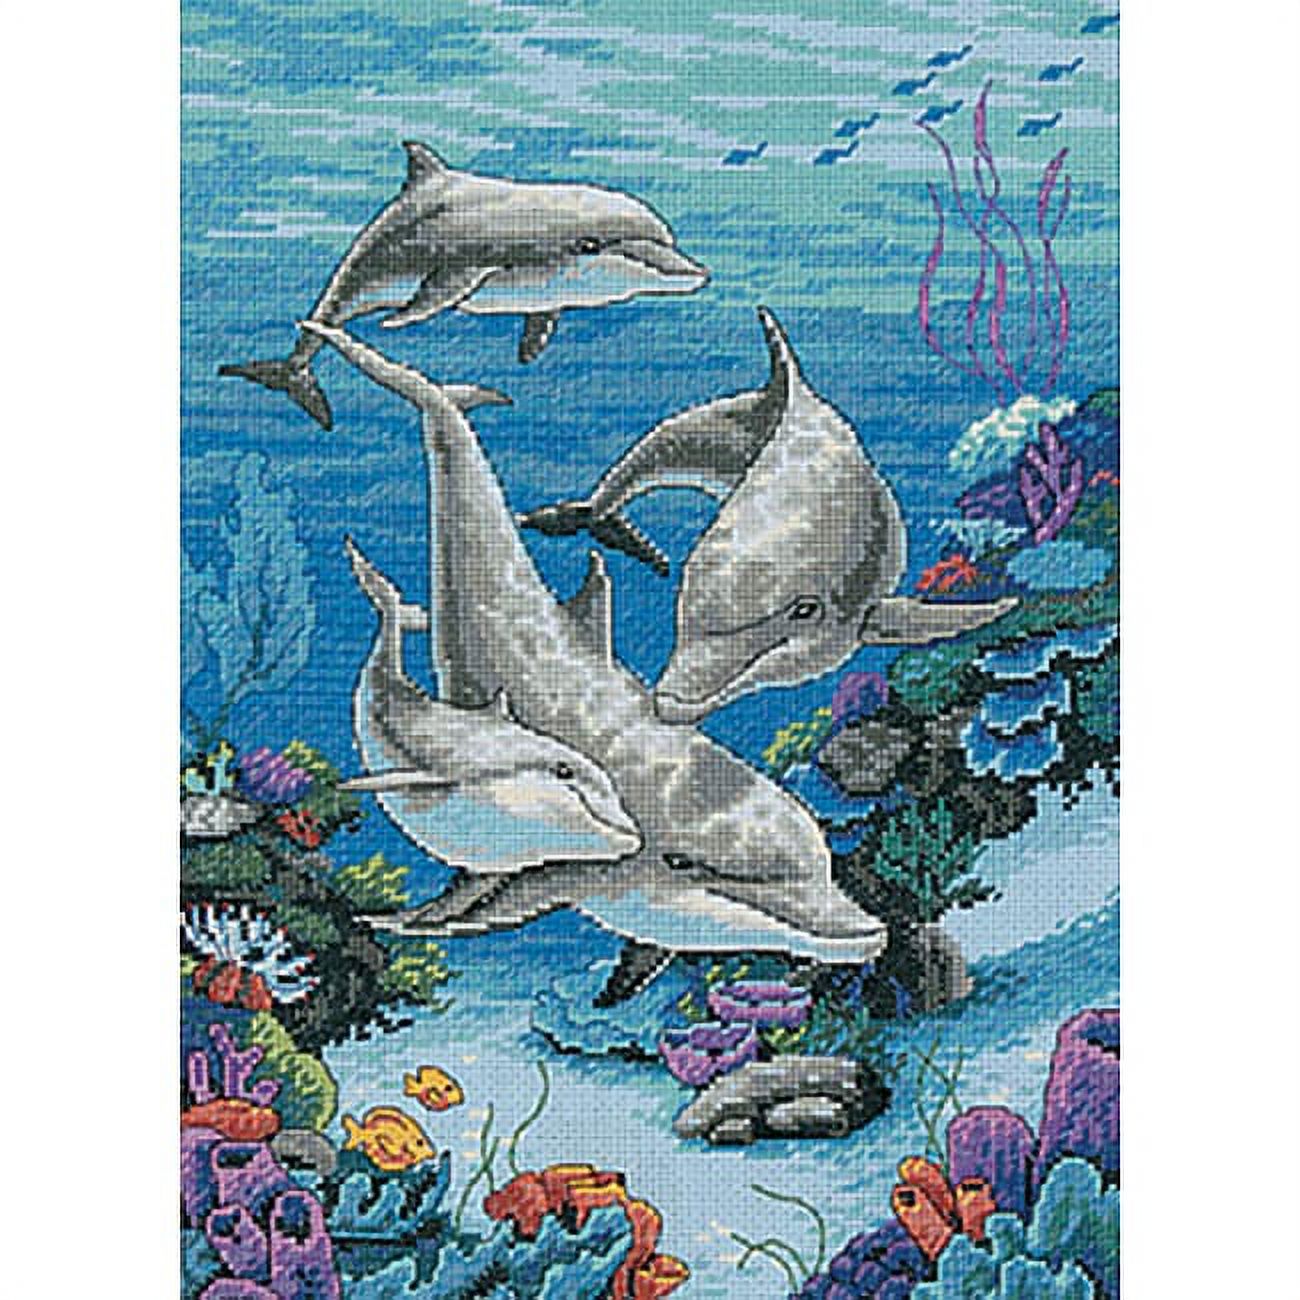 Dimensions Needlecrafts 3830 Dolphins' Domain Counted Cross Stitch Kit - image 3 of 3